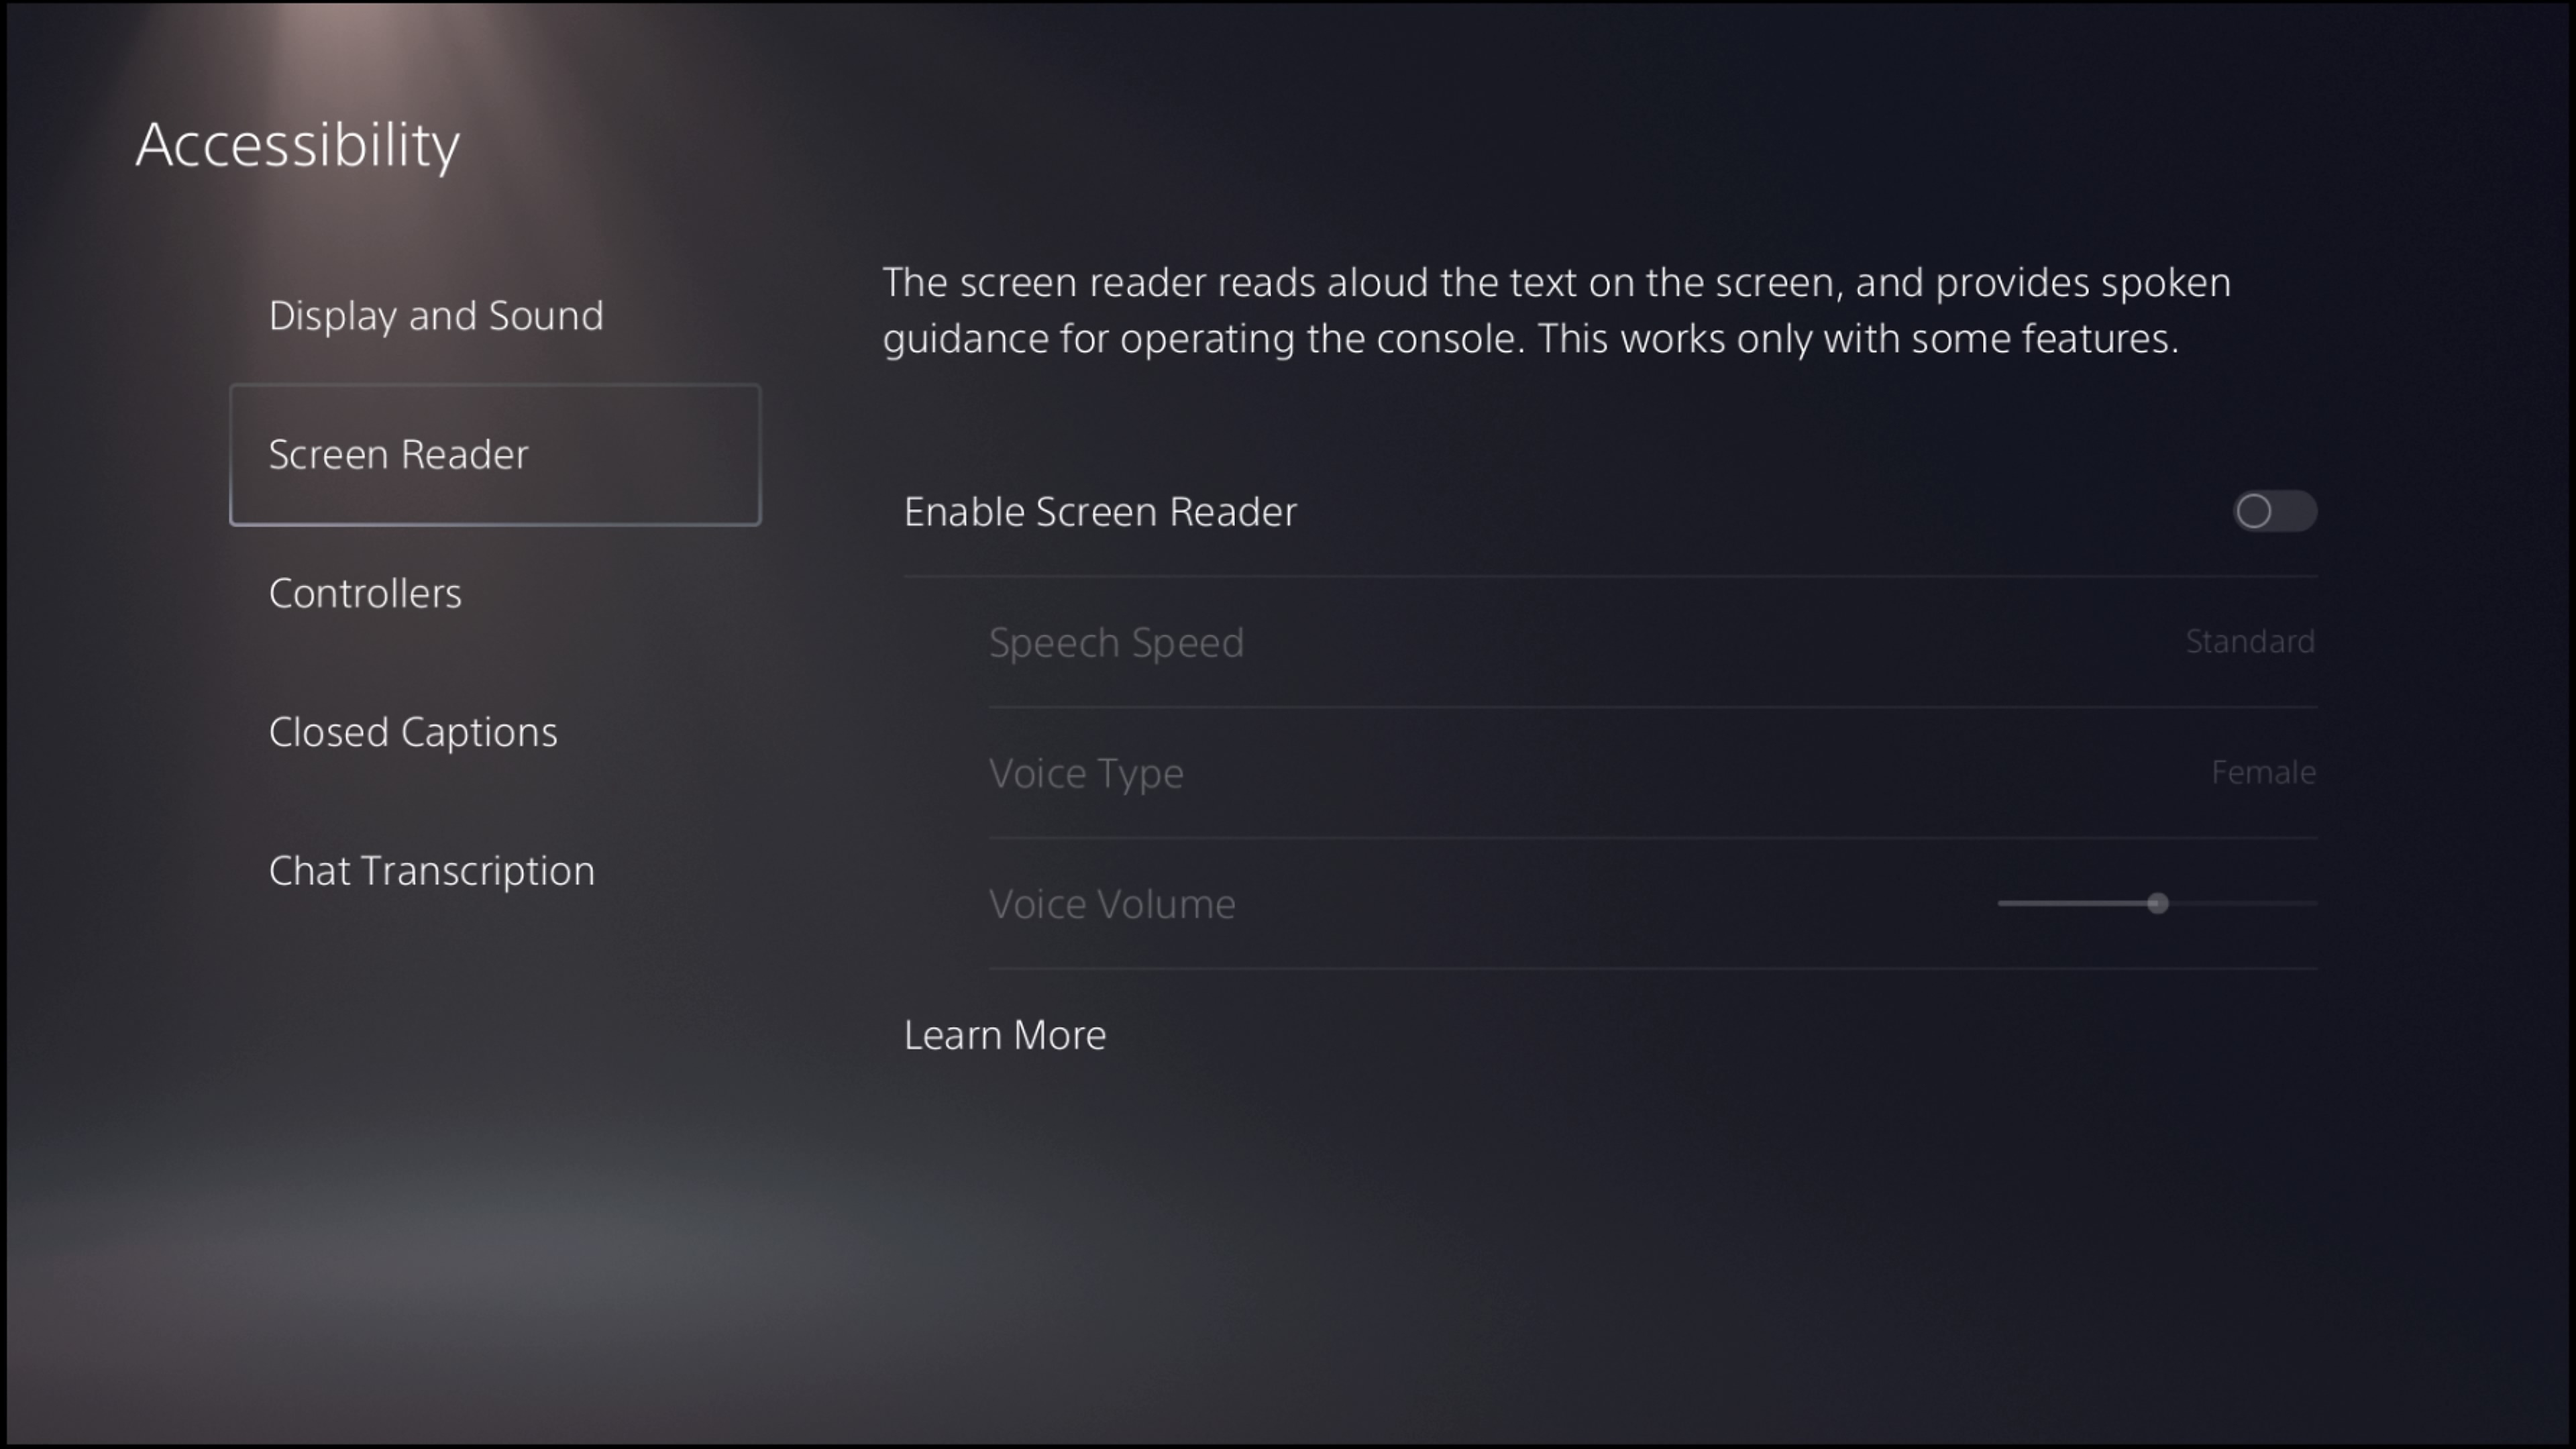 PS5 accessibility — screen reader